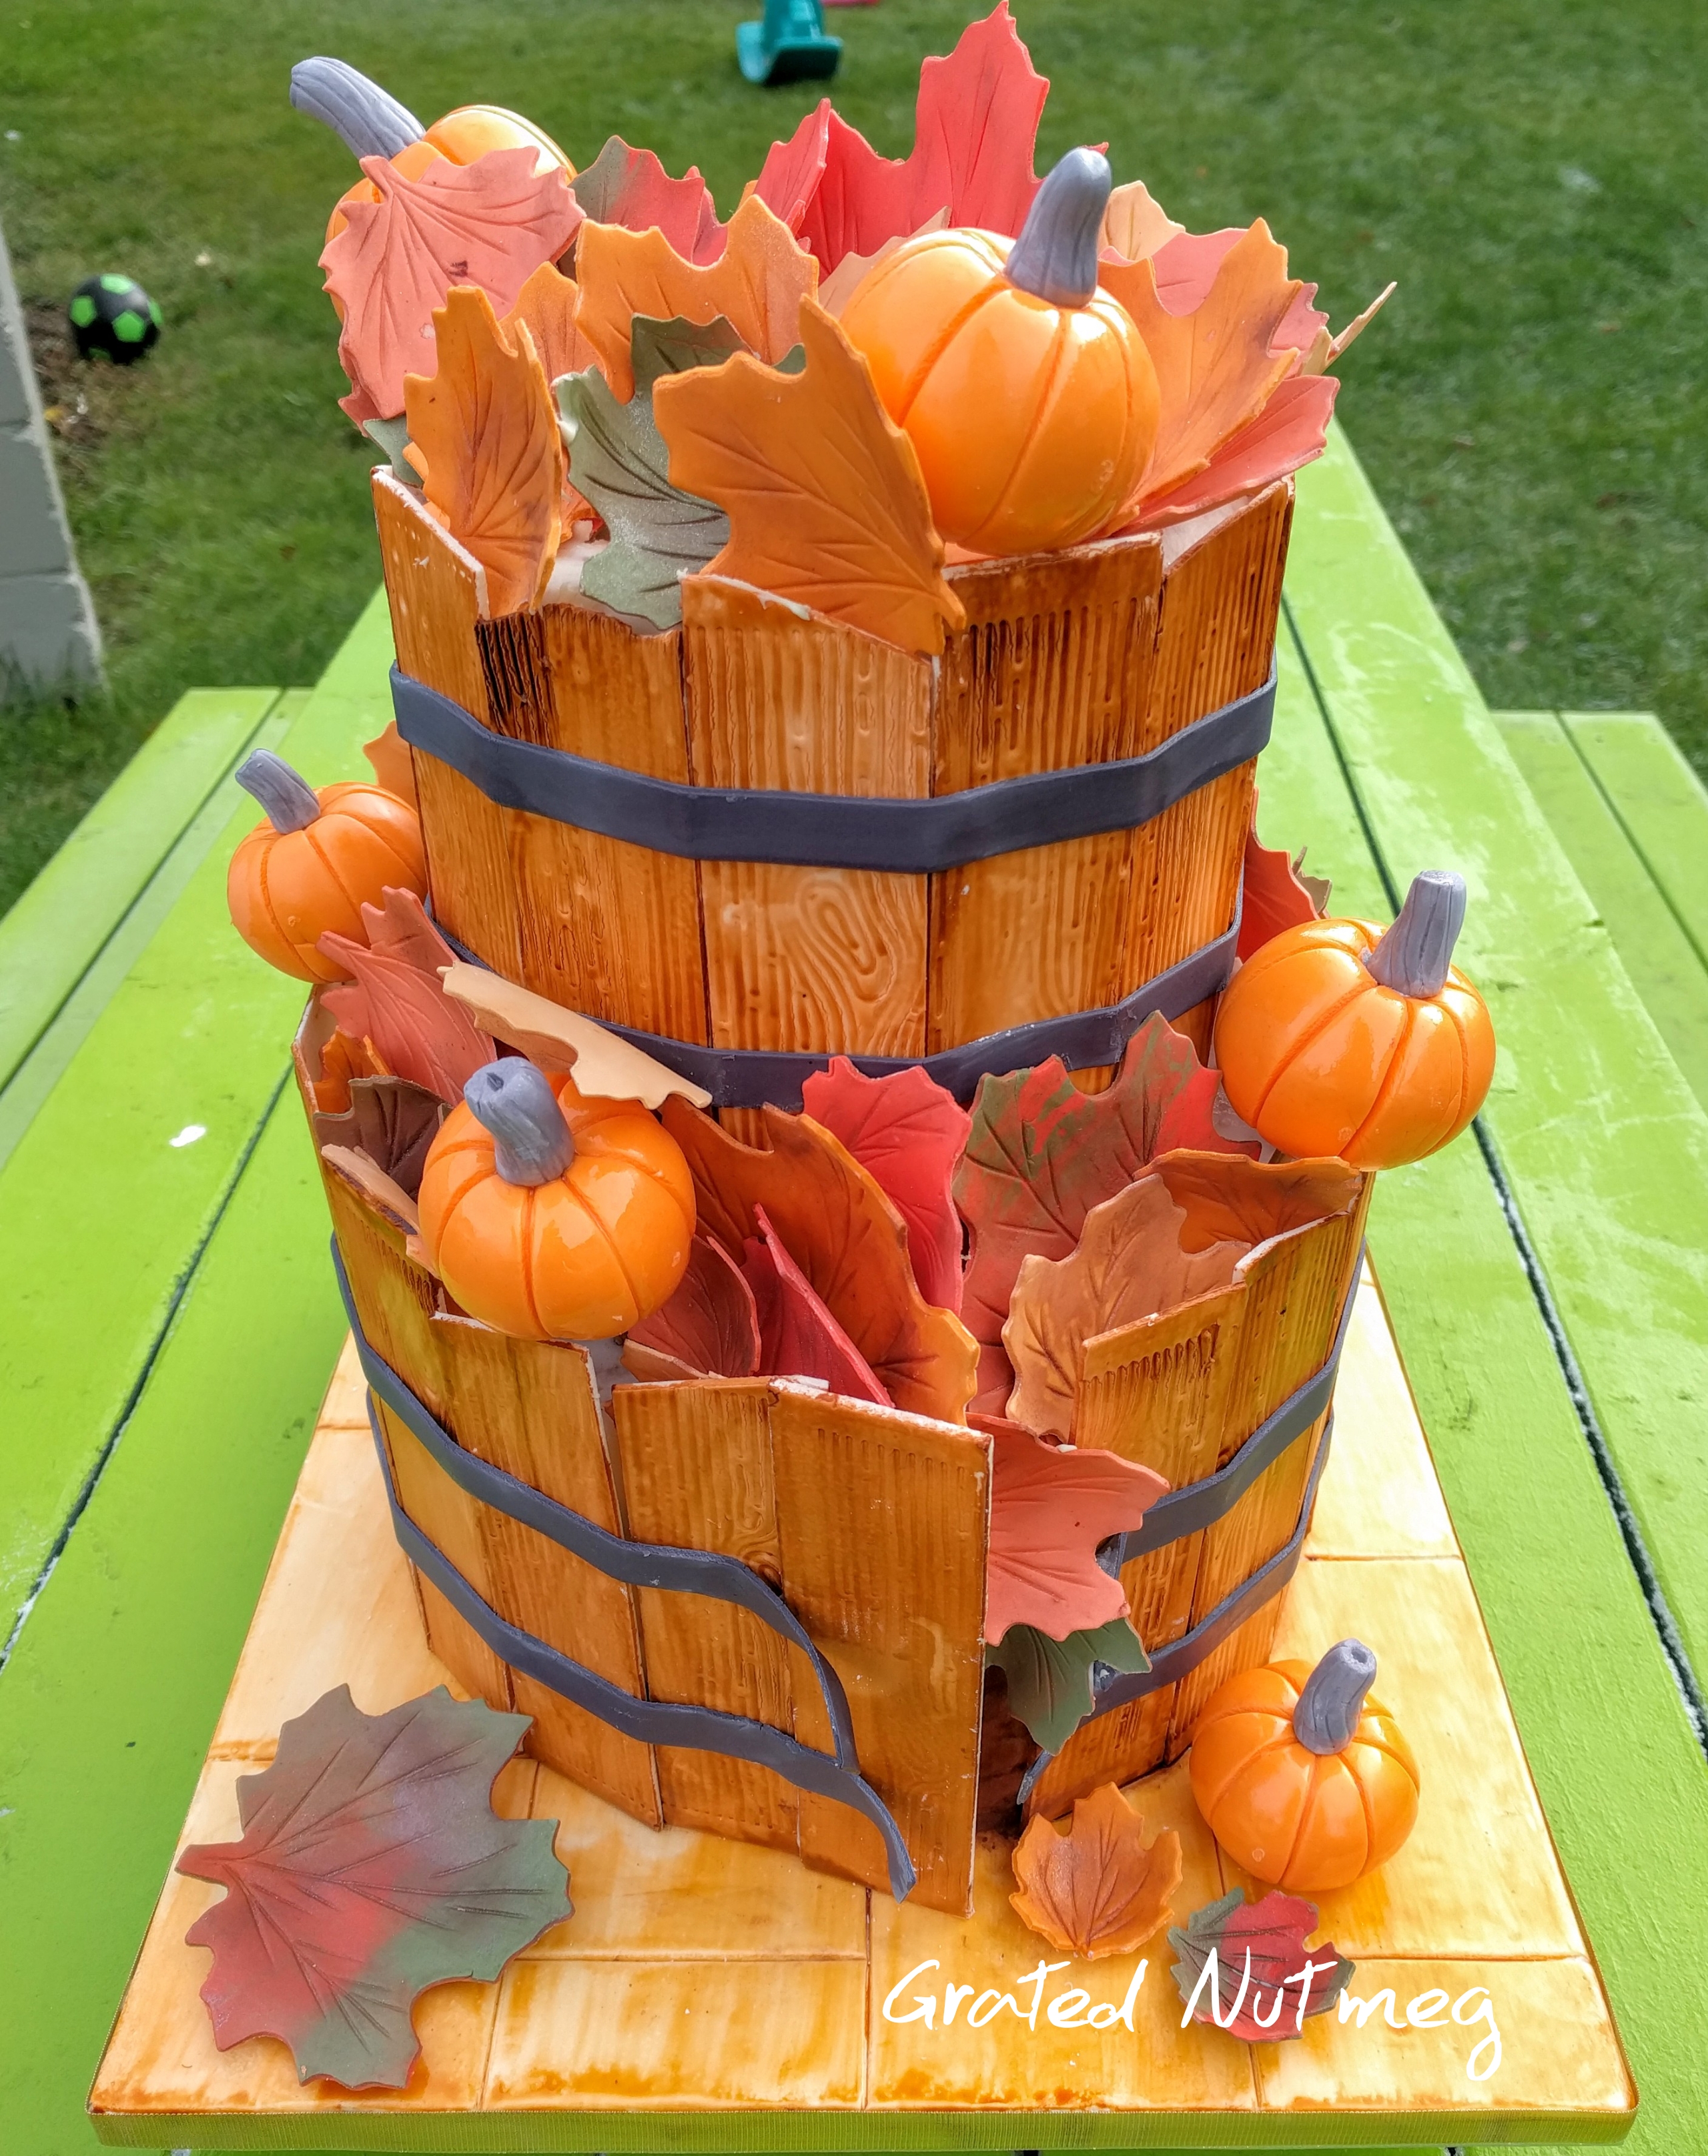 The Making of a Thanksgiving Wooden Barrel Cake